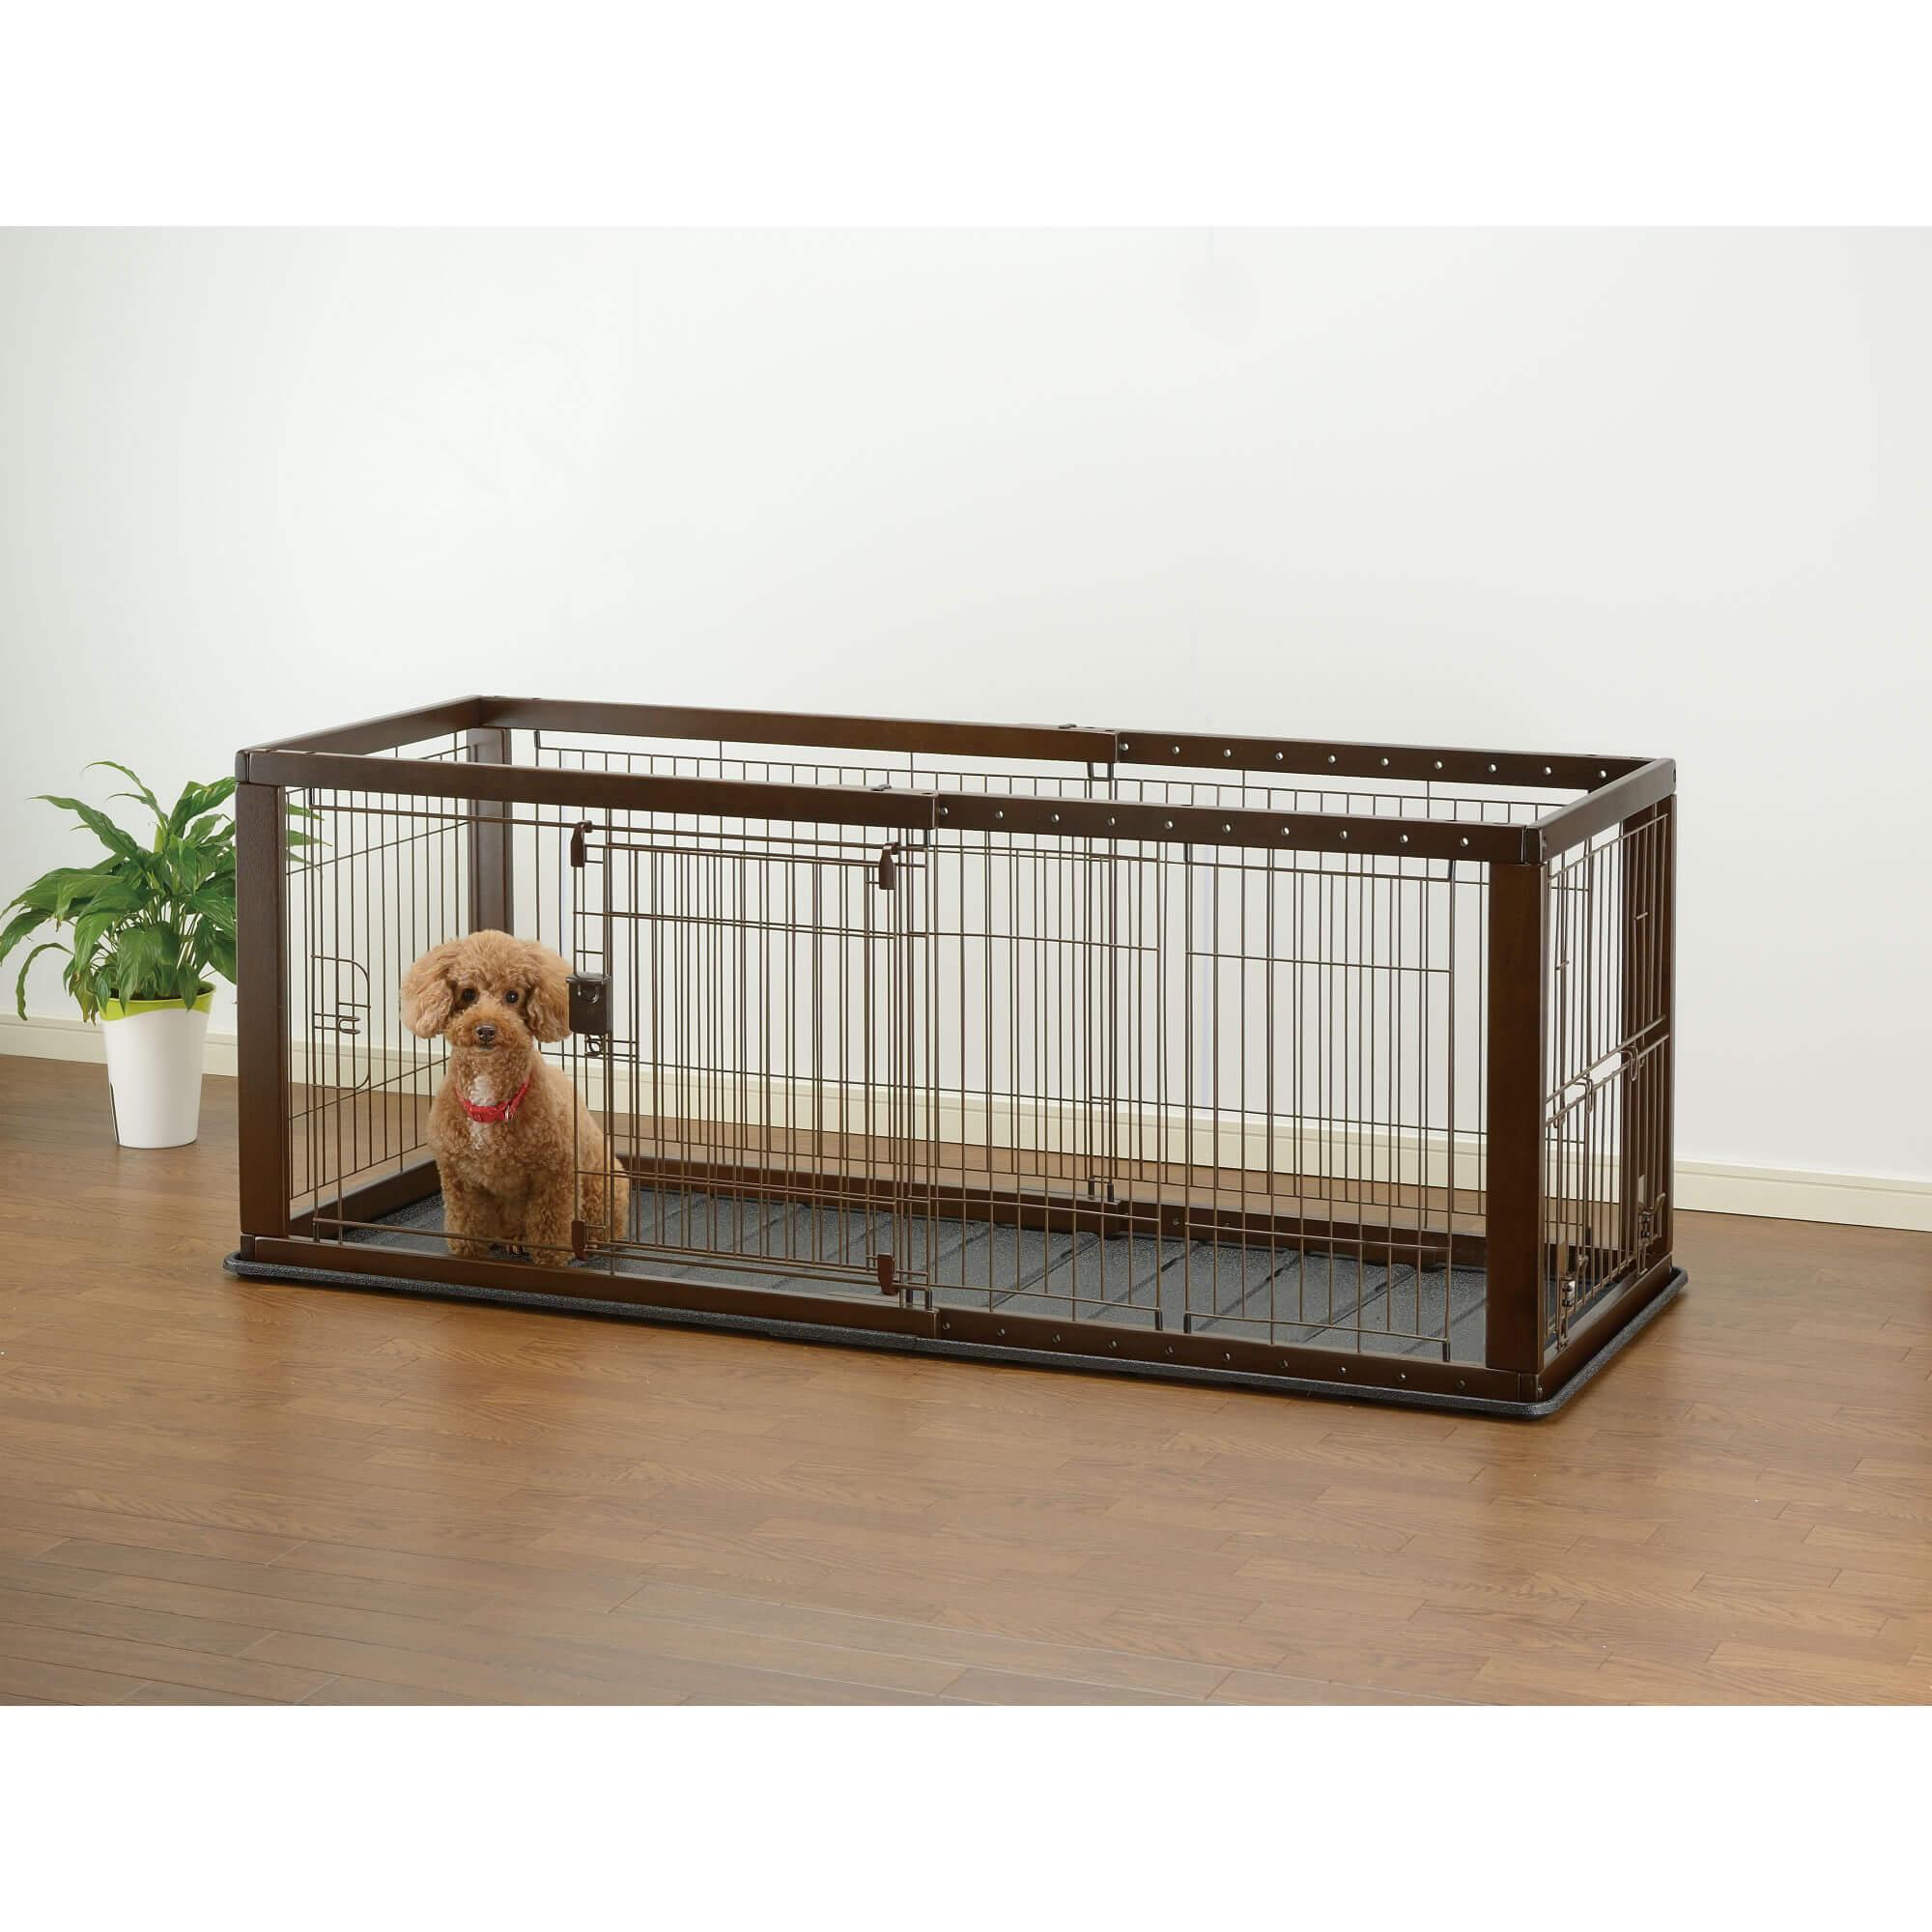 Richell Expandable Dog Crate - Dark Brown